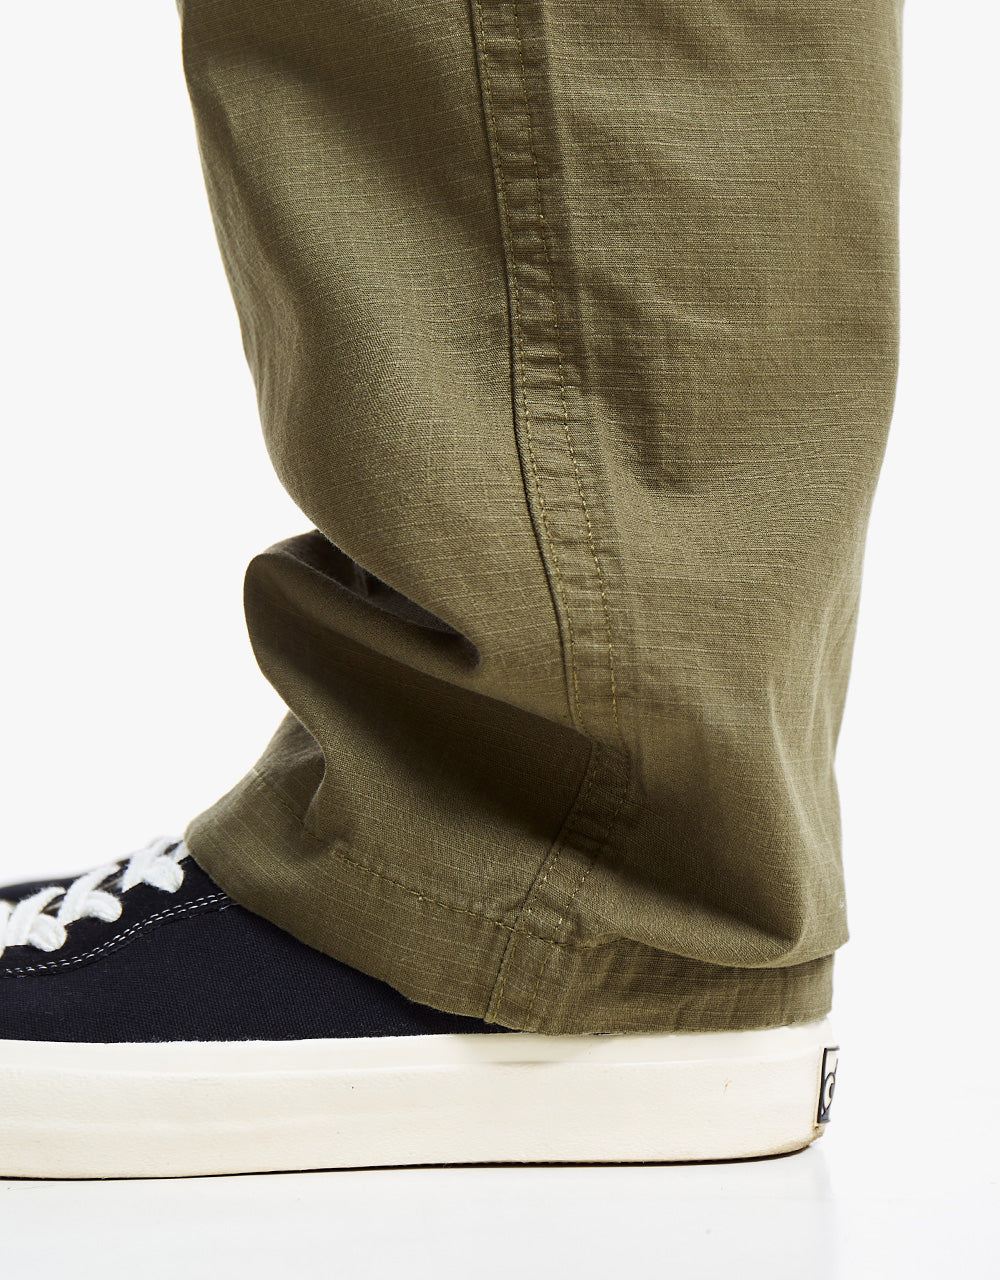 Dickies Eagle Bend Cargo Pant - Military Green